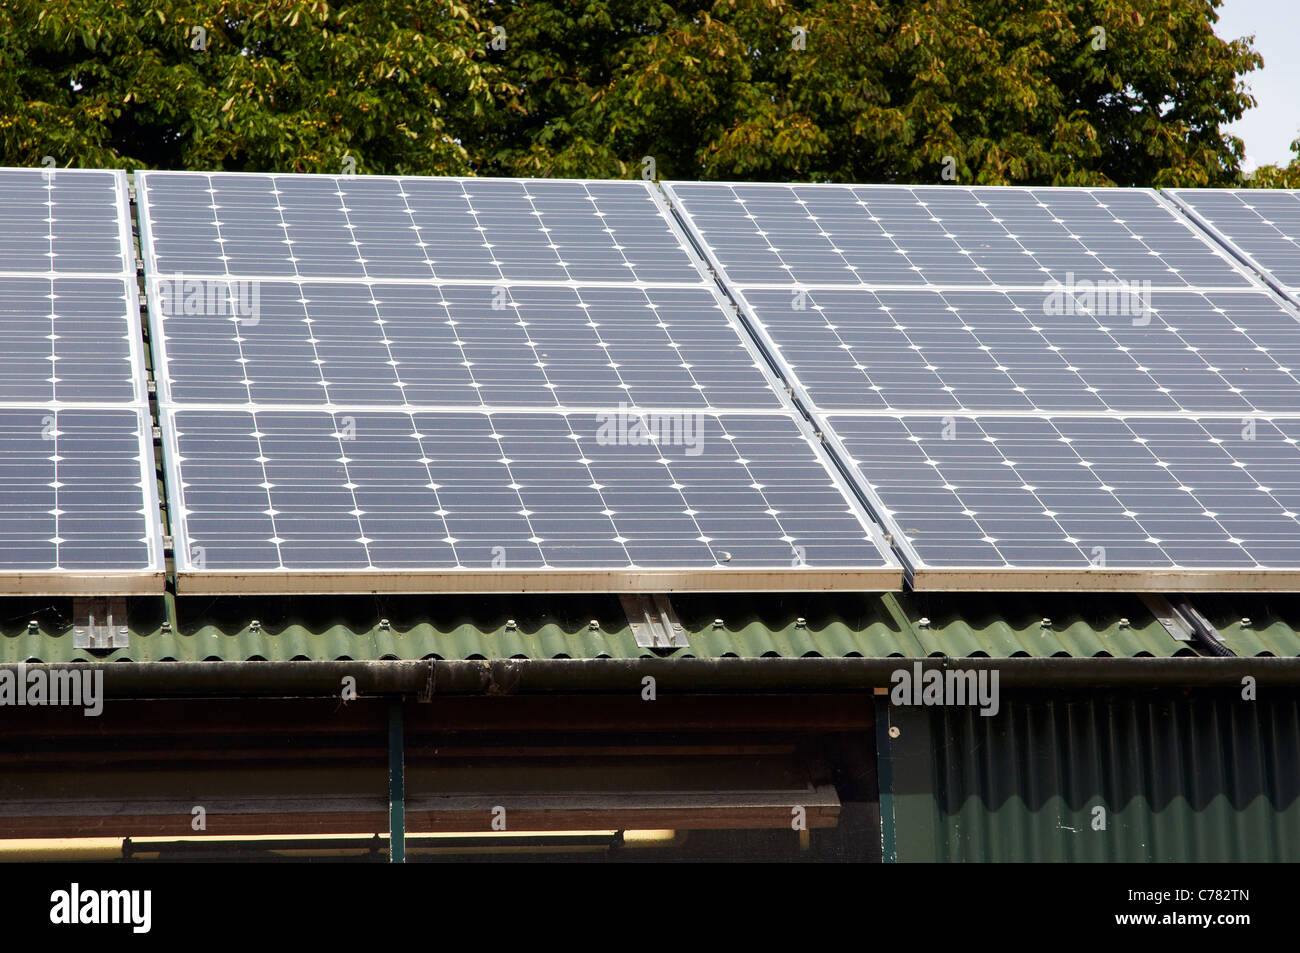 Photovoltaic solar panels on the roof of an eco-friendly building Stock Photo